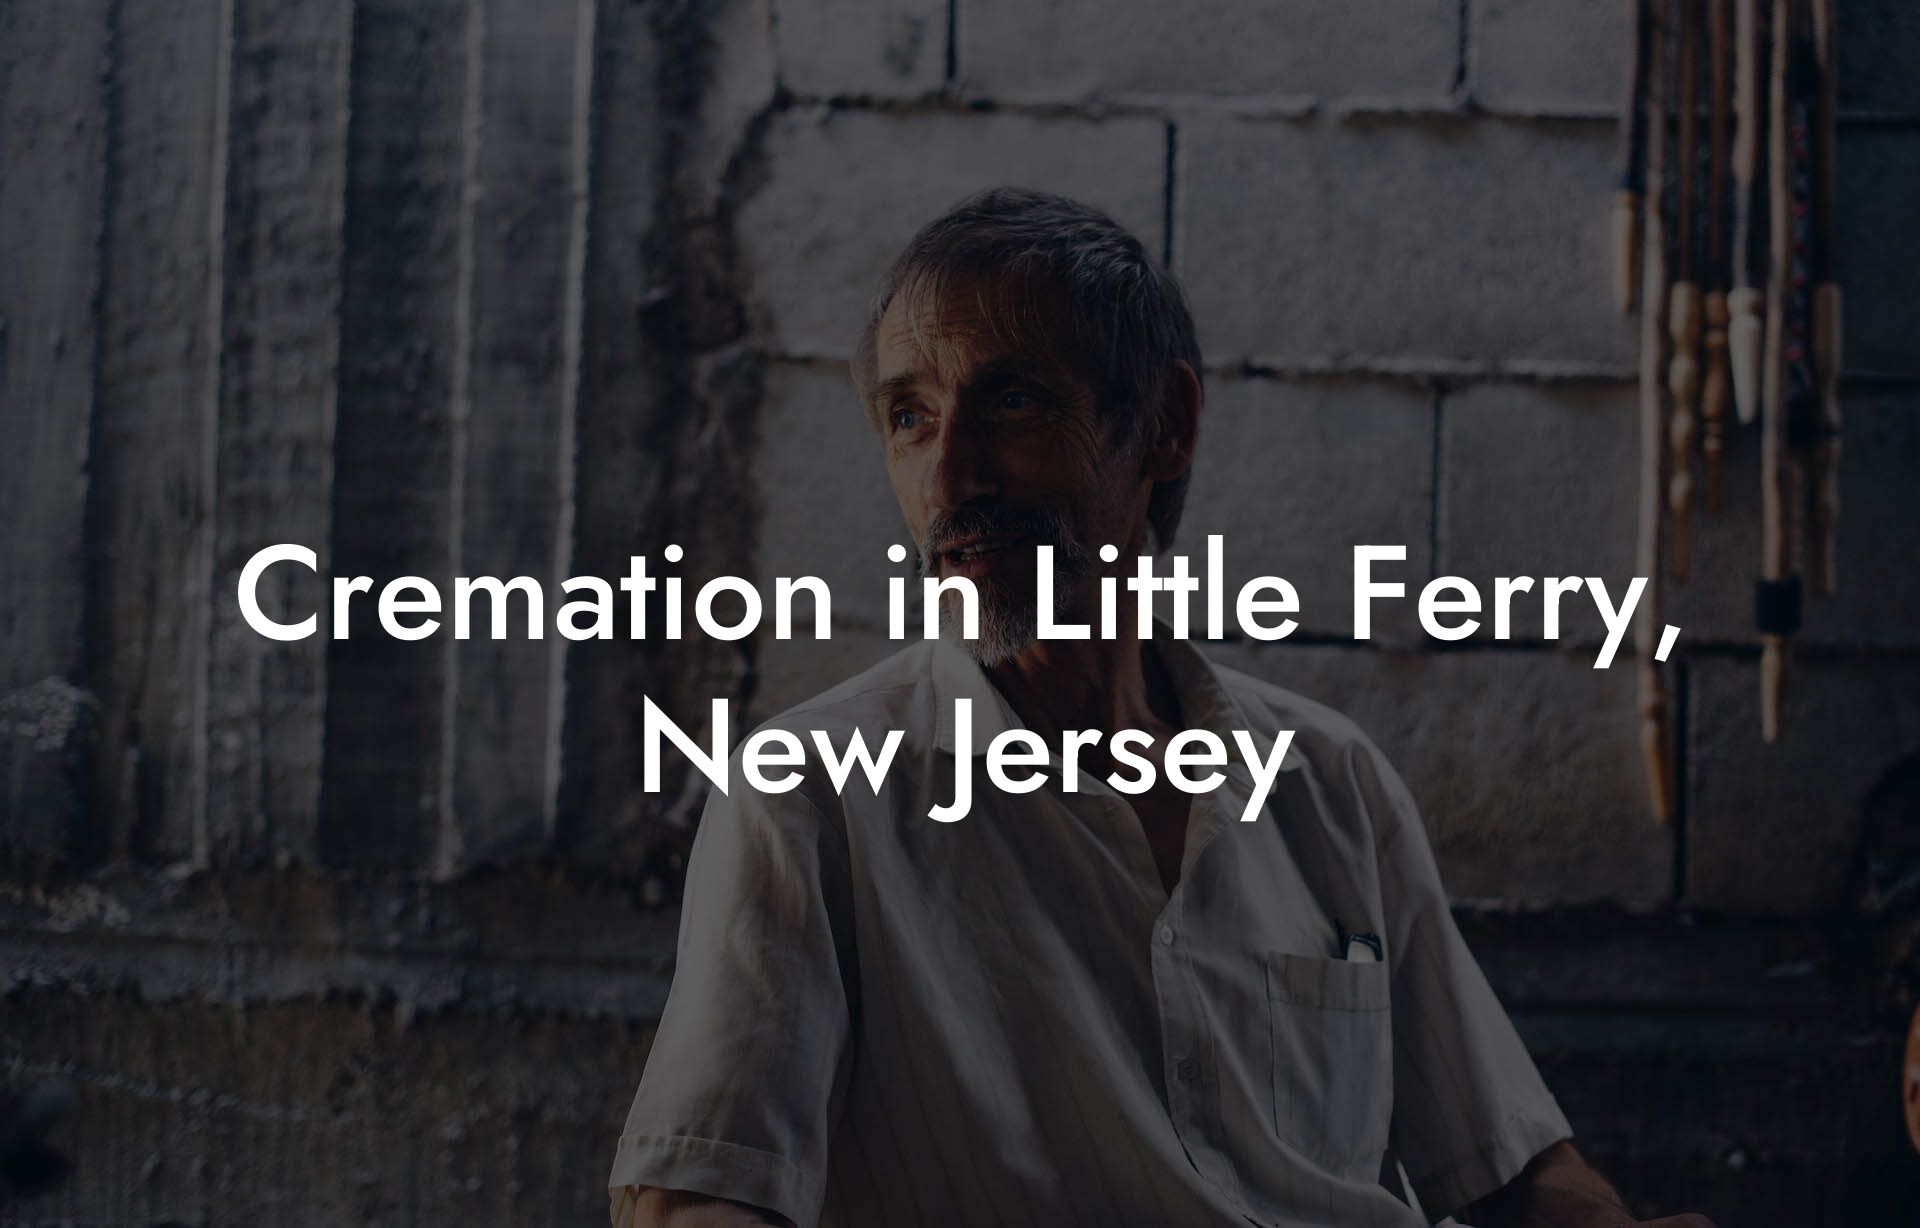 Cremation in Little Ferry, New Jersey